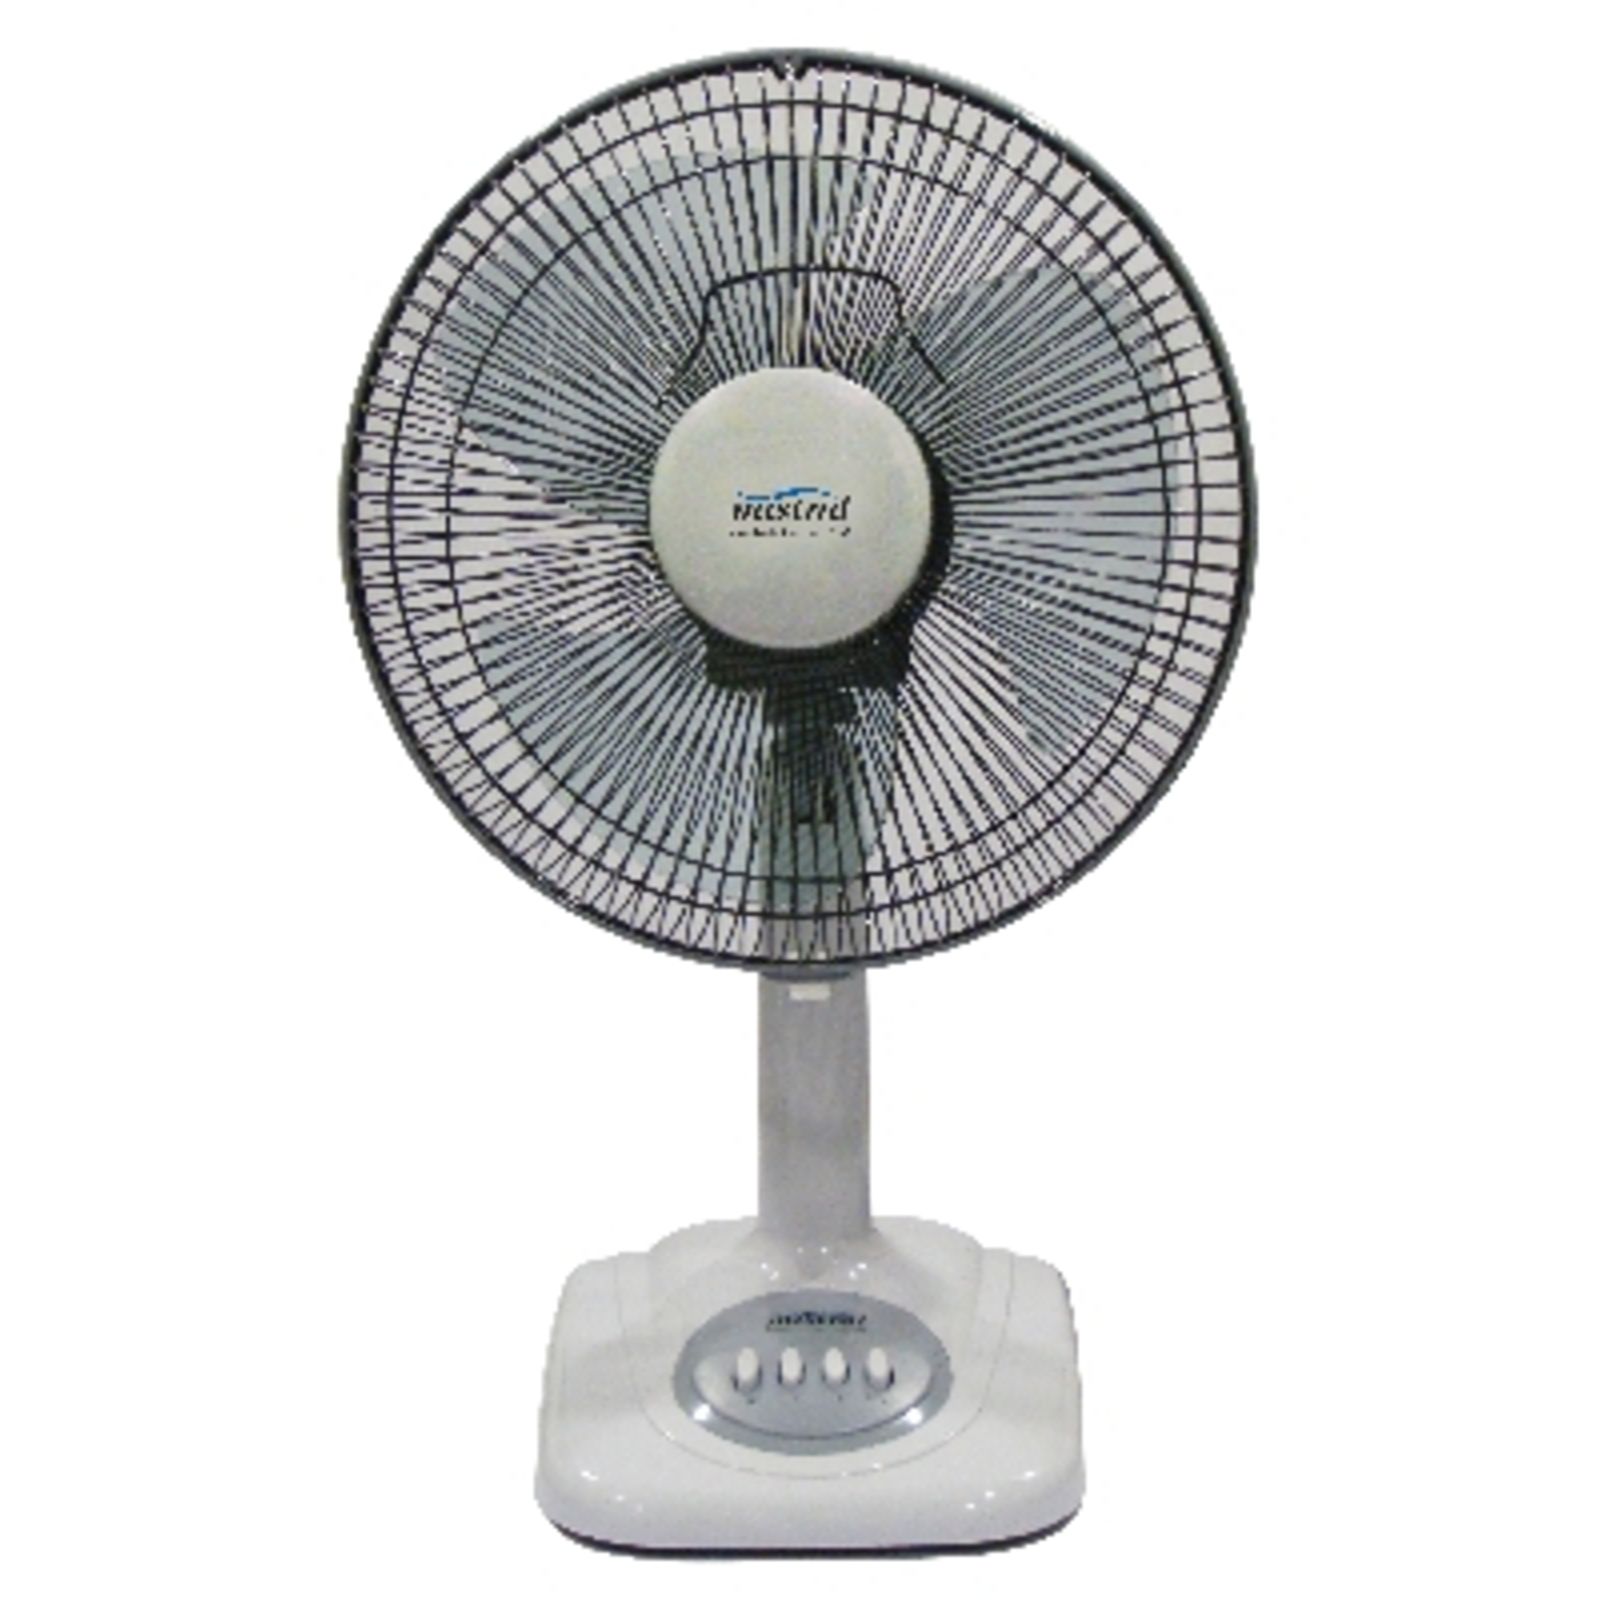 MISTRAL MTF121M 12IN TABLE FAN - FANS - COOLING & AIR CARE - HOME ...